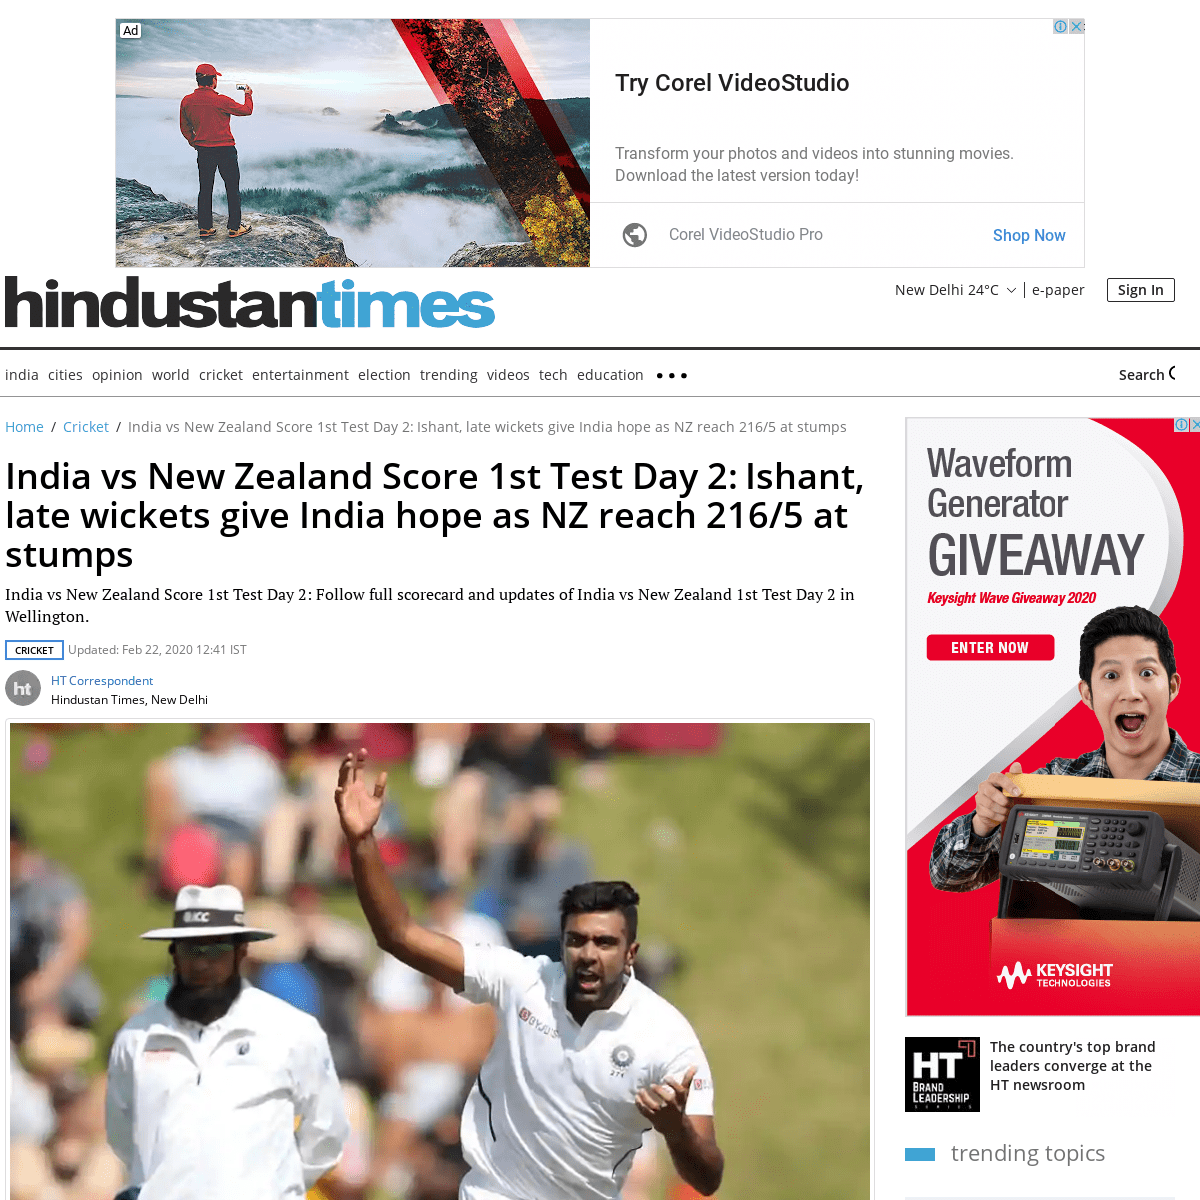 A complete backup of www.hindustantimes.com/cricket/india-vs-new-zealand-live-score-1st-test-match-day-2-at-wellington-weather-r